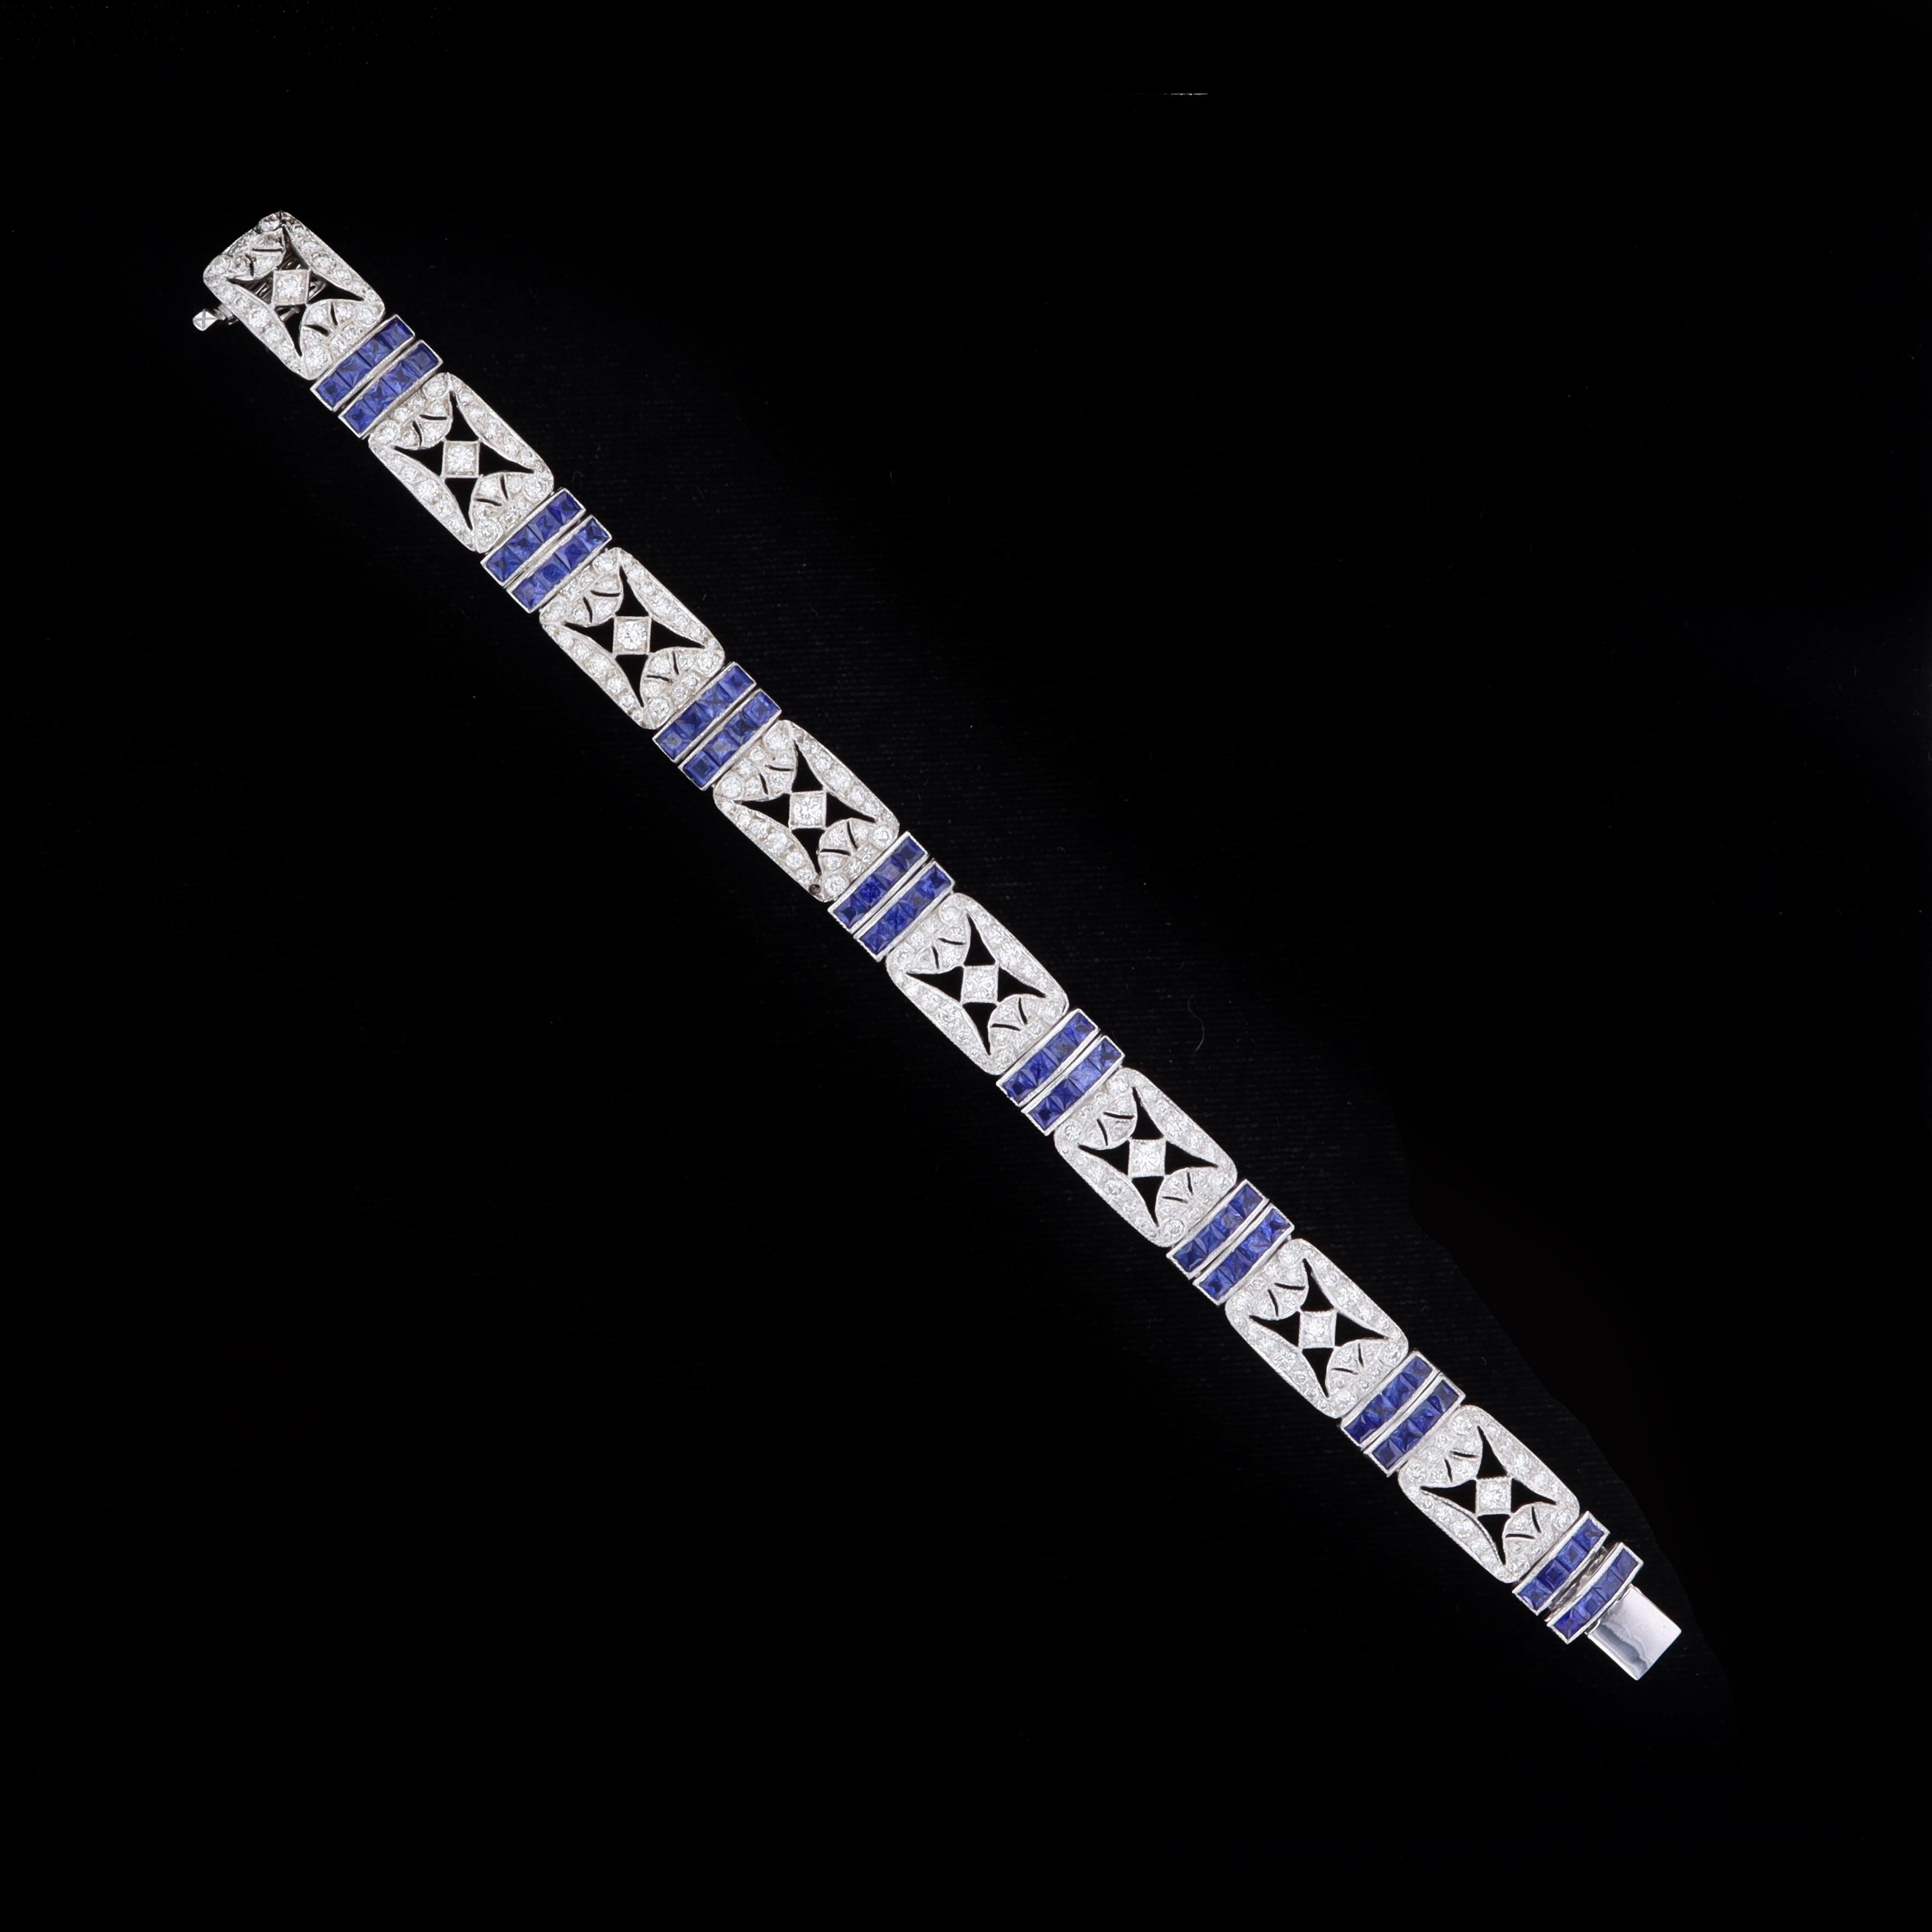 Celebrate an era filled with opulence, style and luxury materials wearing this estate Art Deco diamond and sapphire bracelet. This shimmering bracelet is set with sparkling round cut diamonds that weigh approximately 4.59ct. The color of these